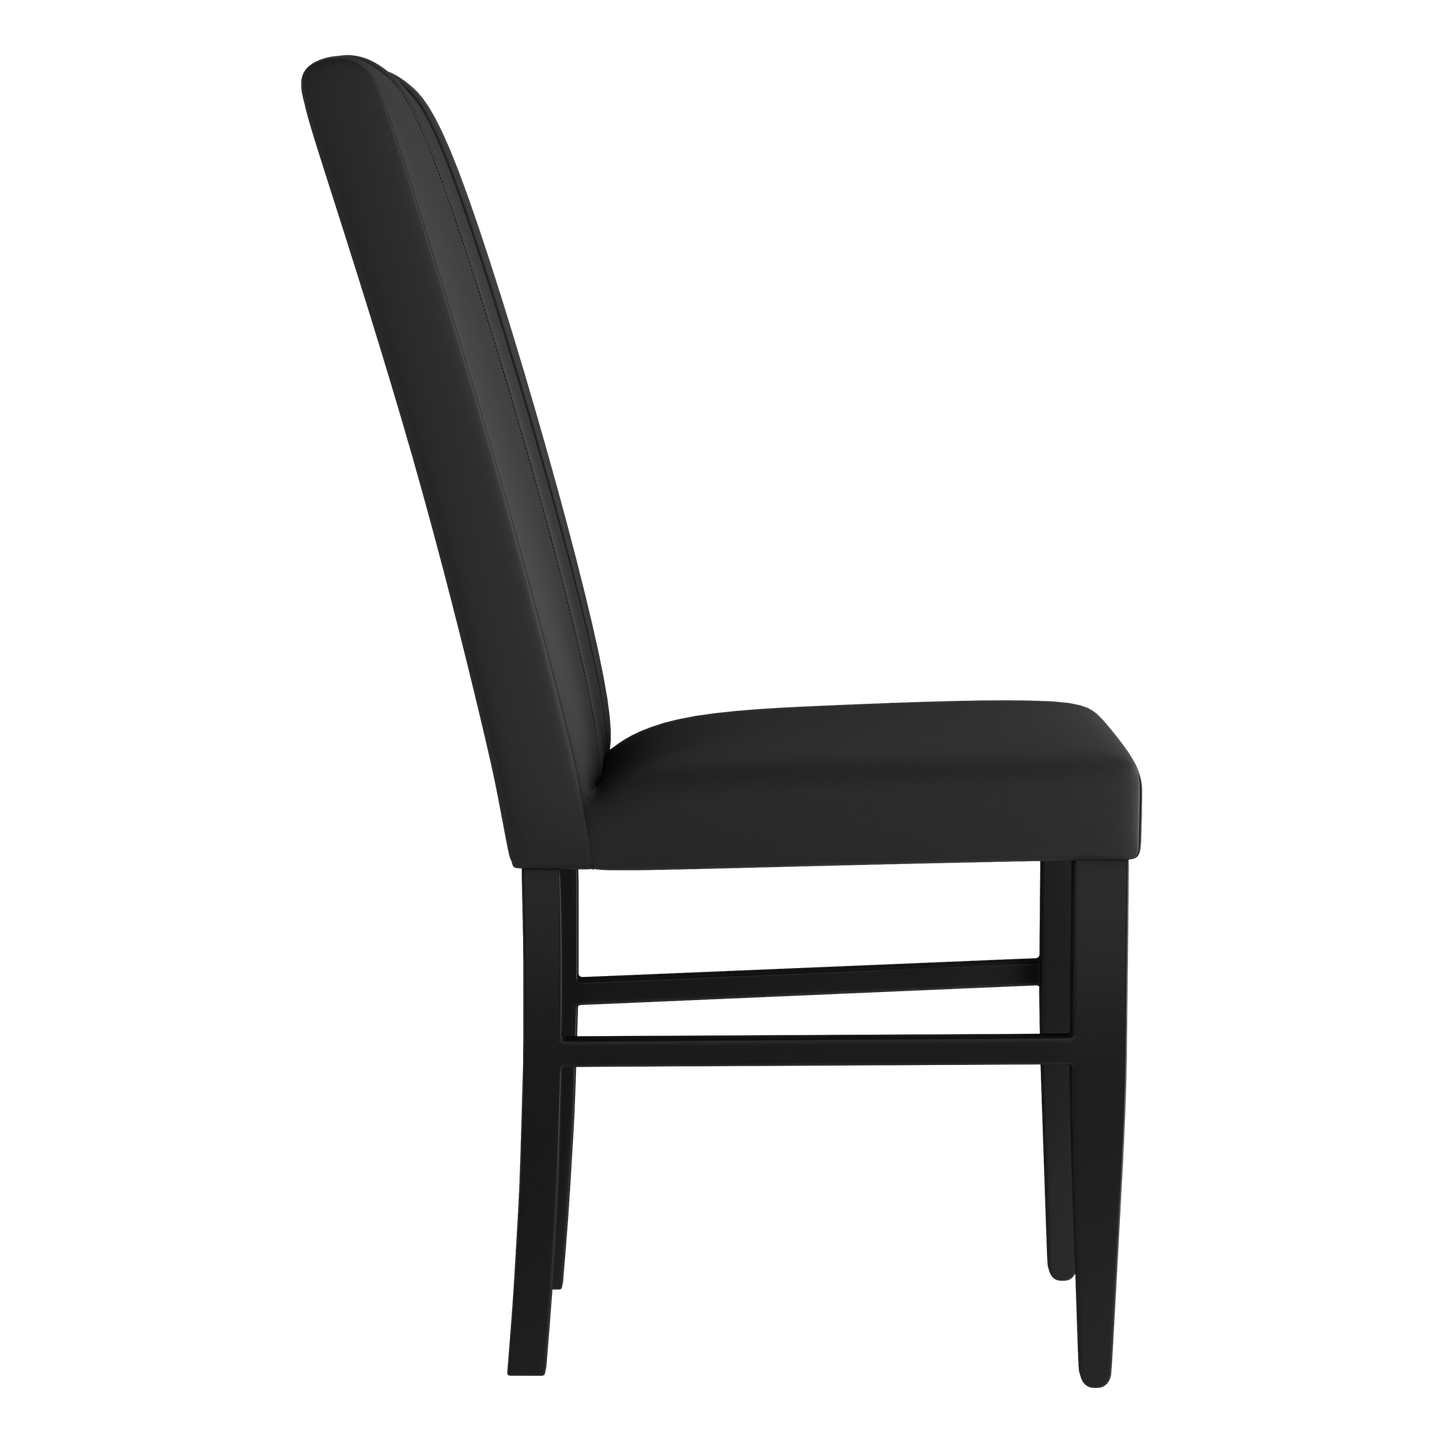 Side Chair 2000 with Toronto Raptors Primary 2019 Champions Logo Set of 2